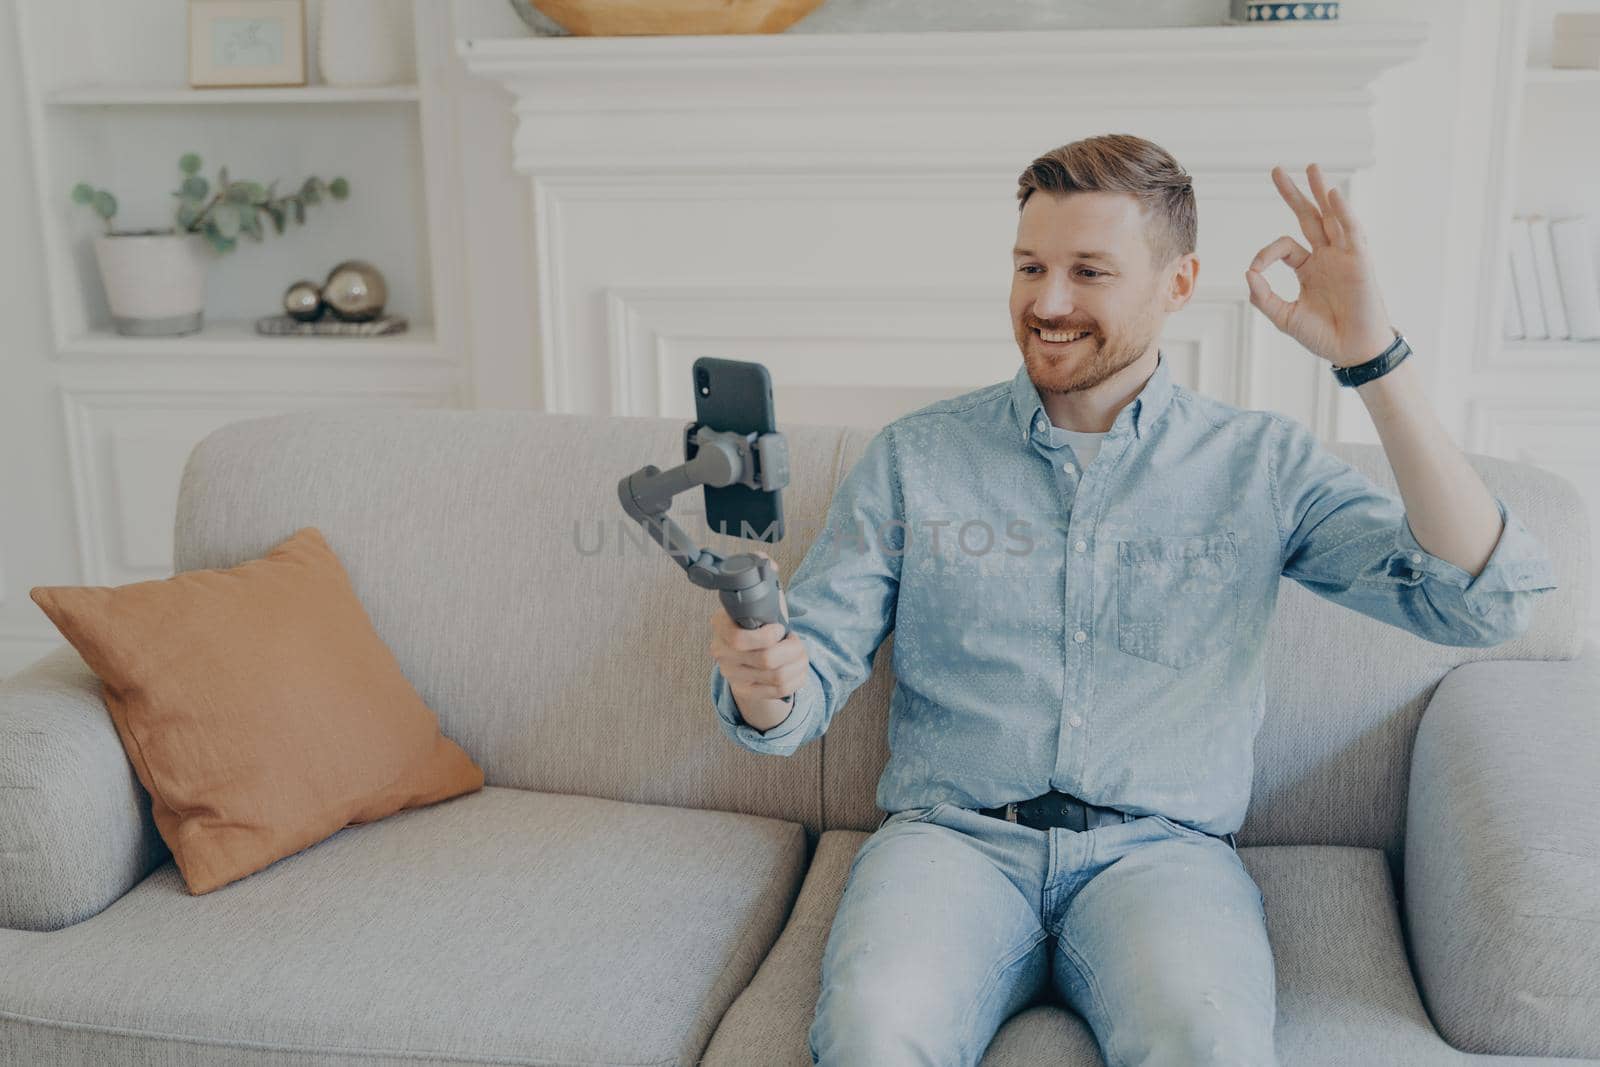 Casually dressed young man showing thumbs up while video chatting using phone attached to gimbal, sitting comfortably on beige couch in living room, having conversationg with family